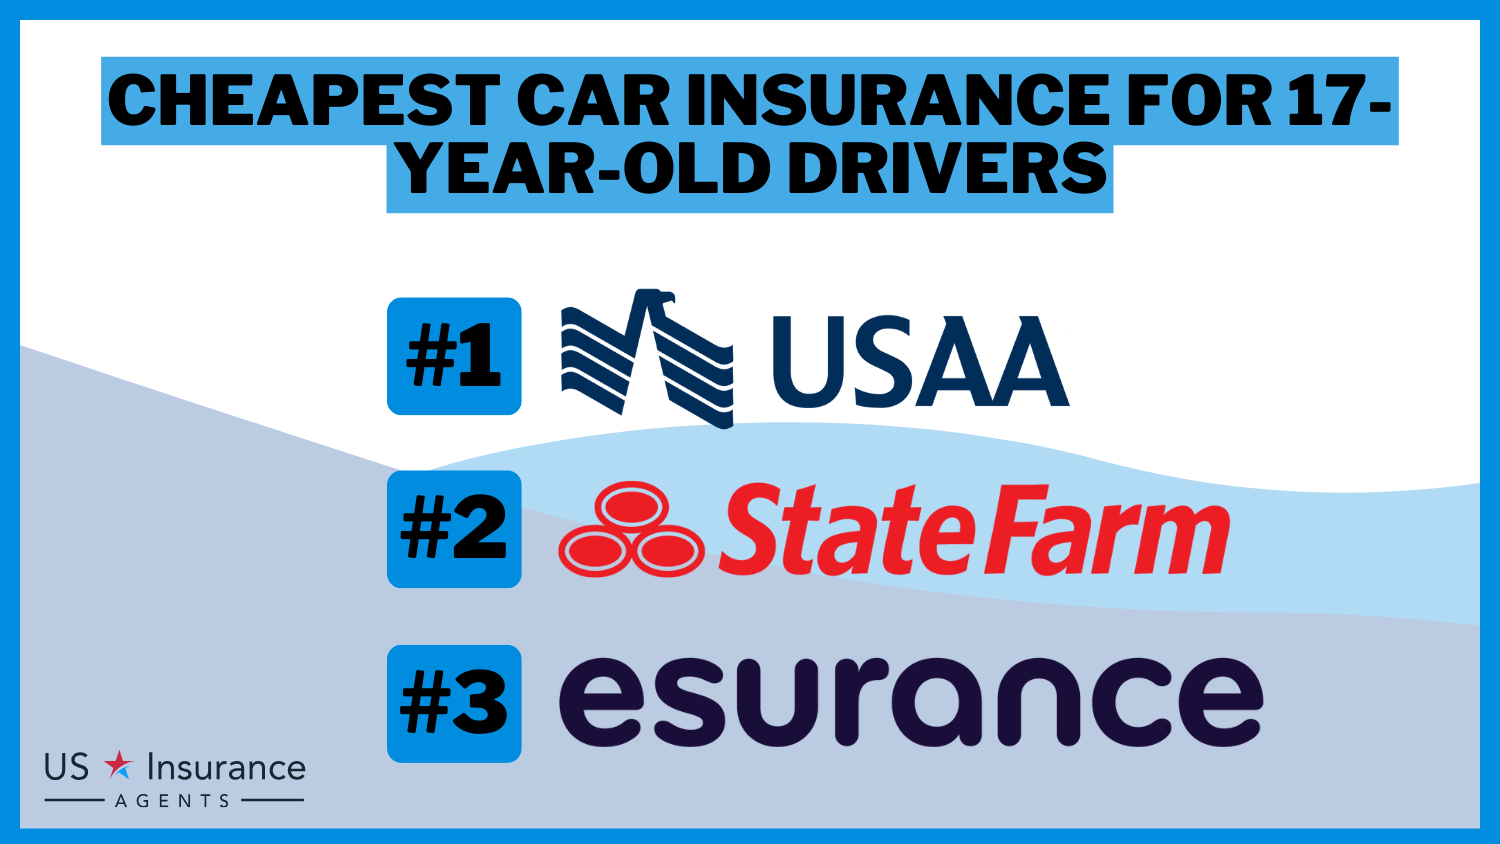 Cheapest Car Insurance for 17-Year-Old Drivers: USAA, State Farm, and Esurance.